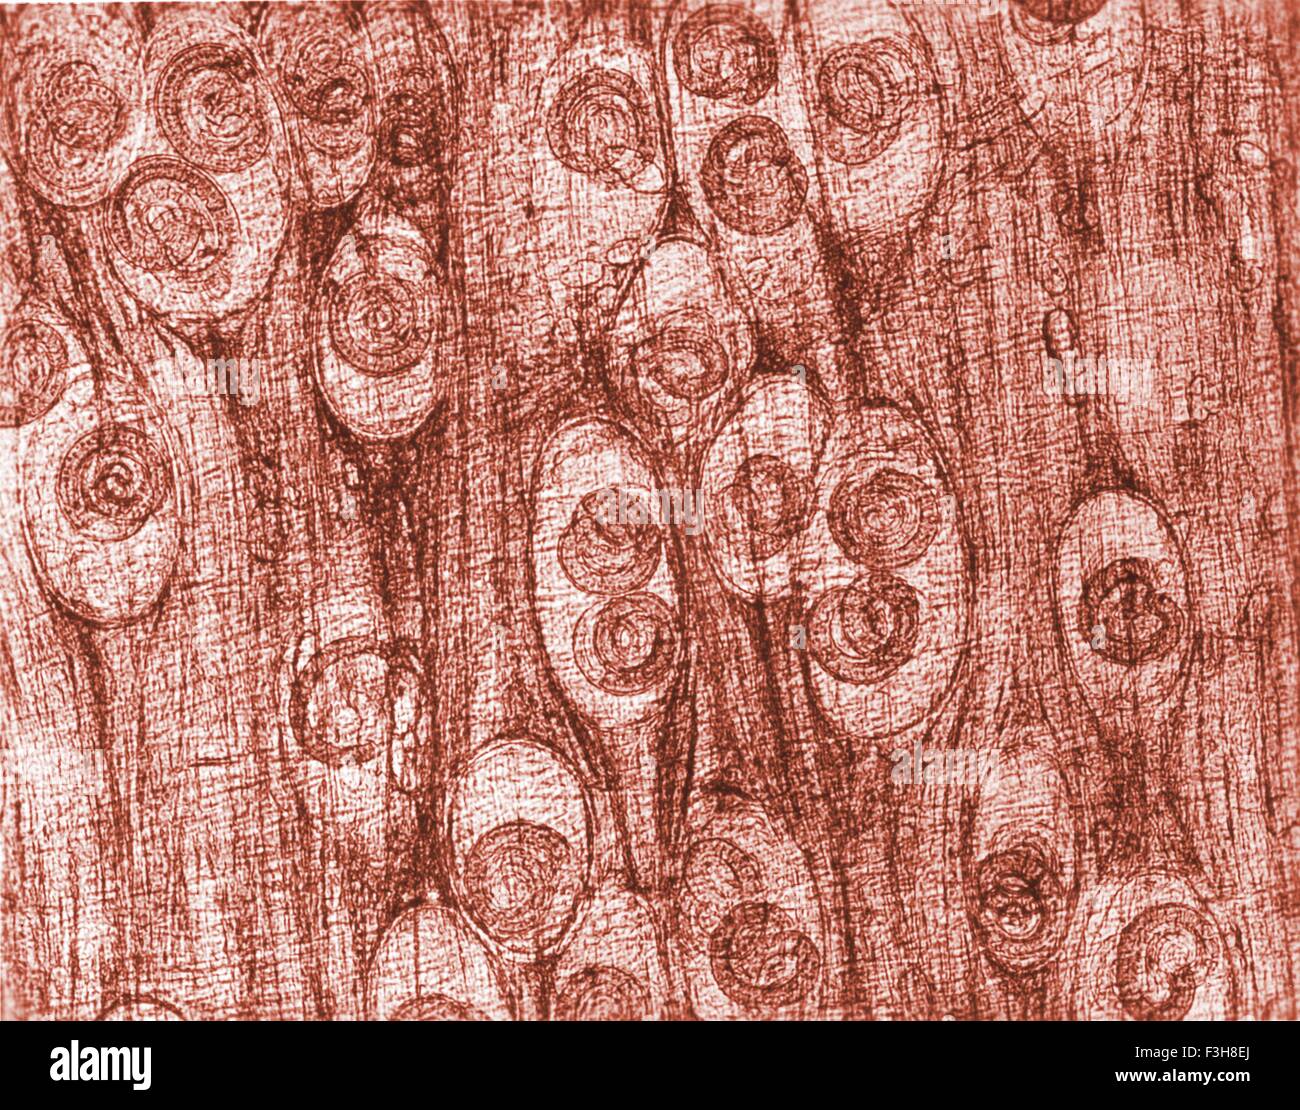 Photomicrograph of Trichinella spiralis cysts seen embedded in a muscle tissue specimen, in a case of trichinellosis Stock Photo